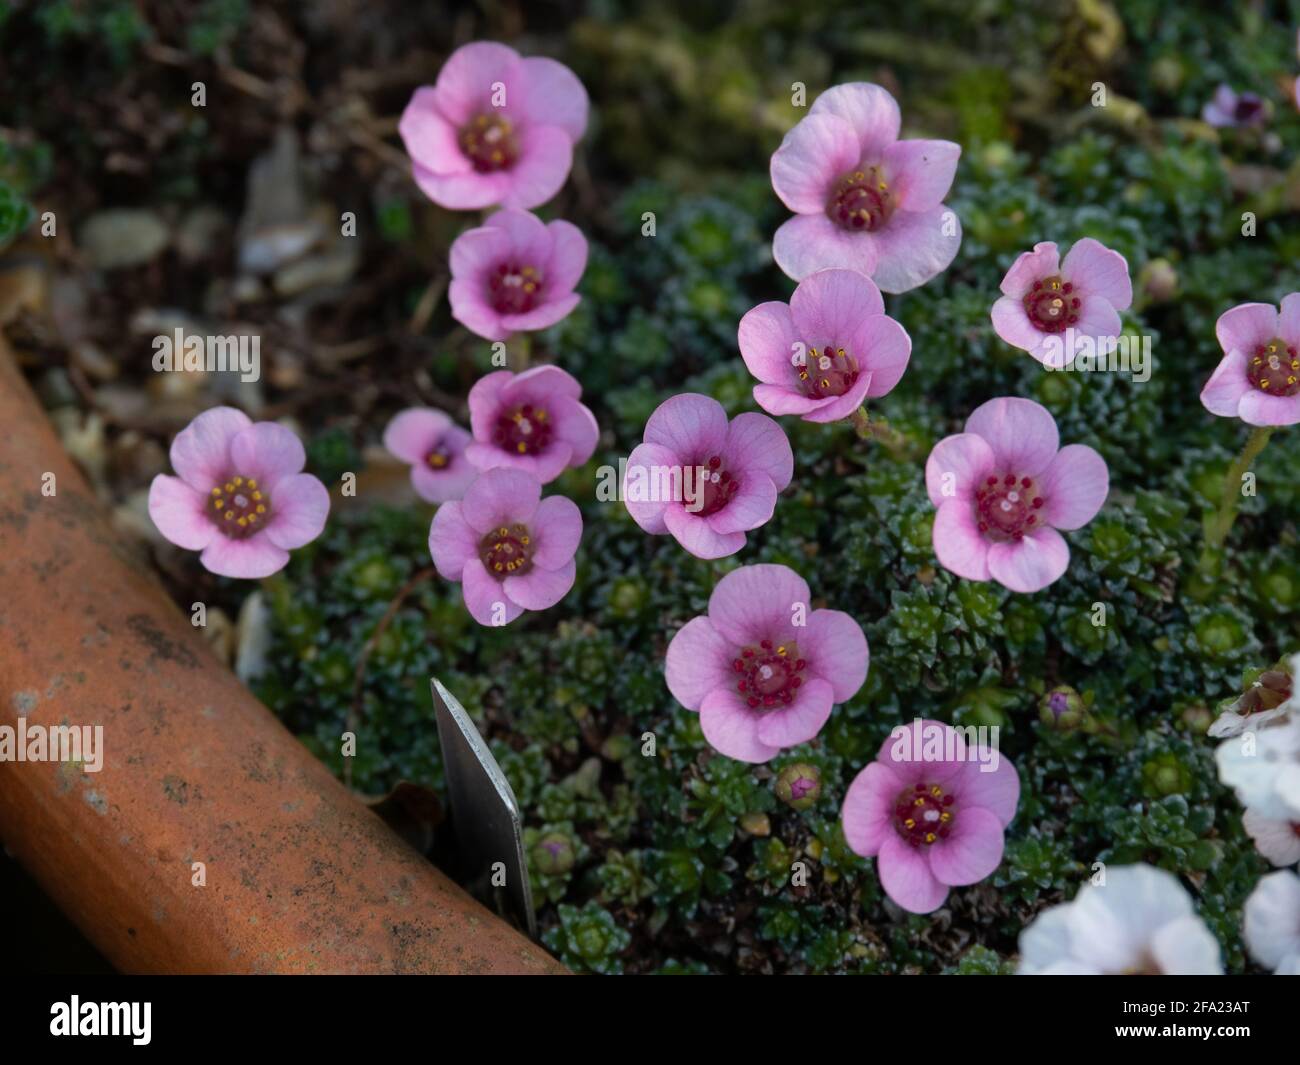 A plant of the kabschia Saxifrage Cranbourne growing in a terracotta pan and showing the pale pink flowers Stock Photo